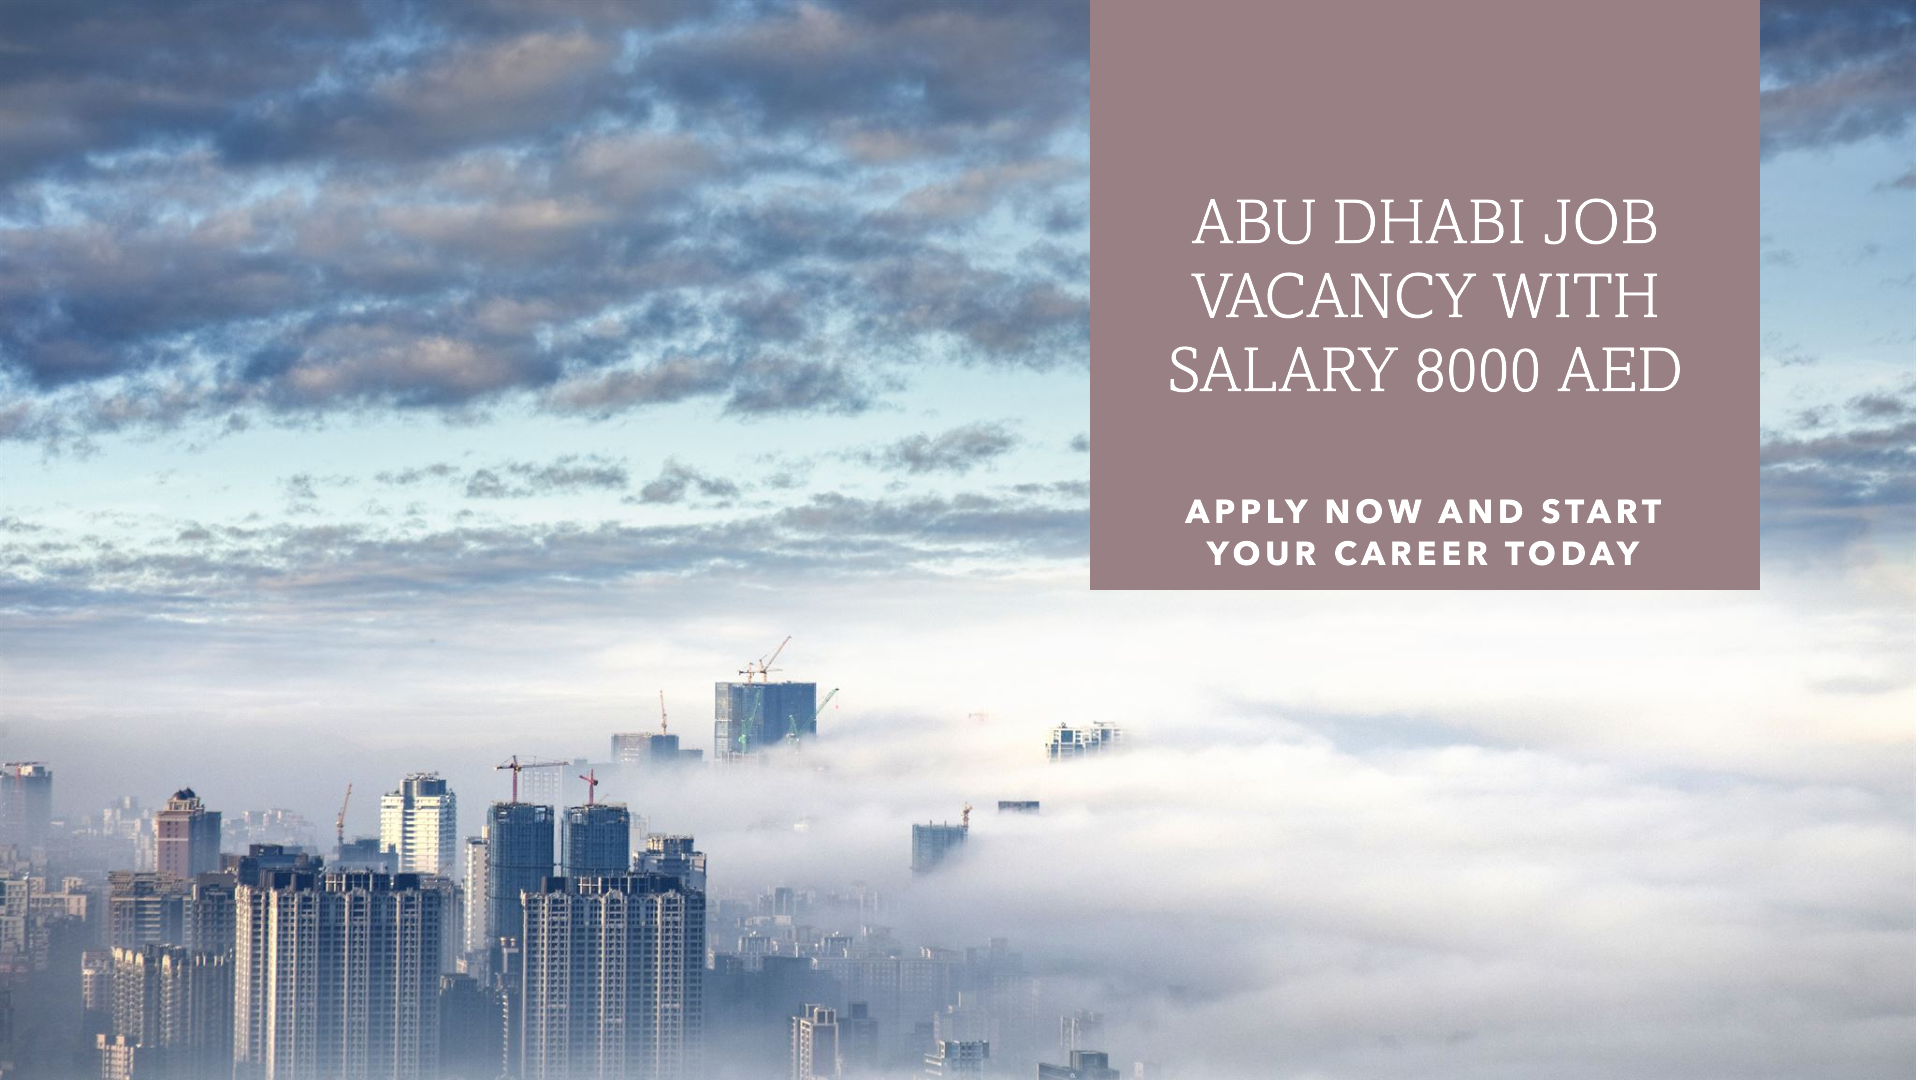 abu dhabi job vacancy for arabic and english speakers with salary 8000 AED